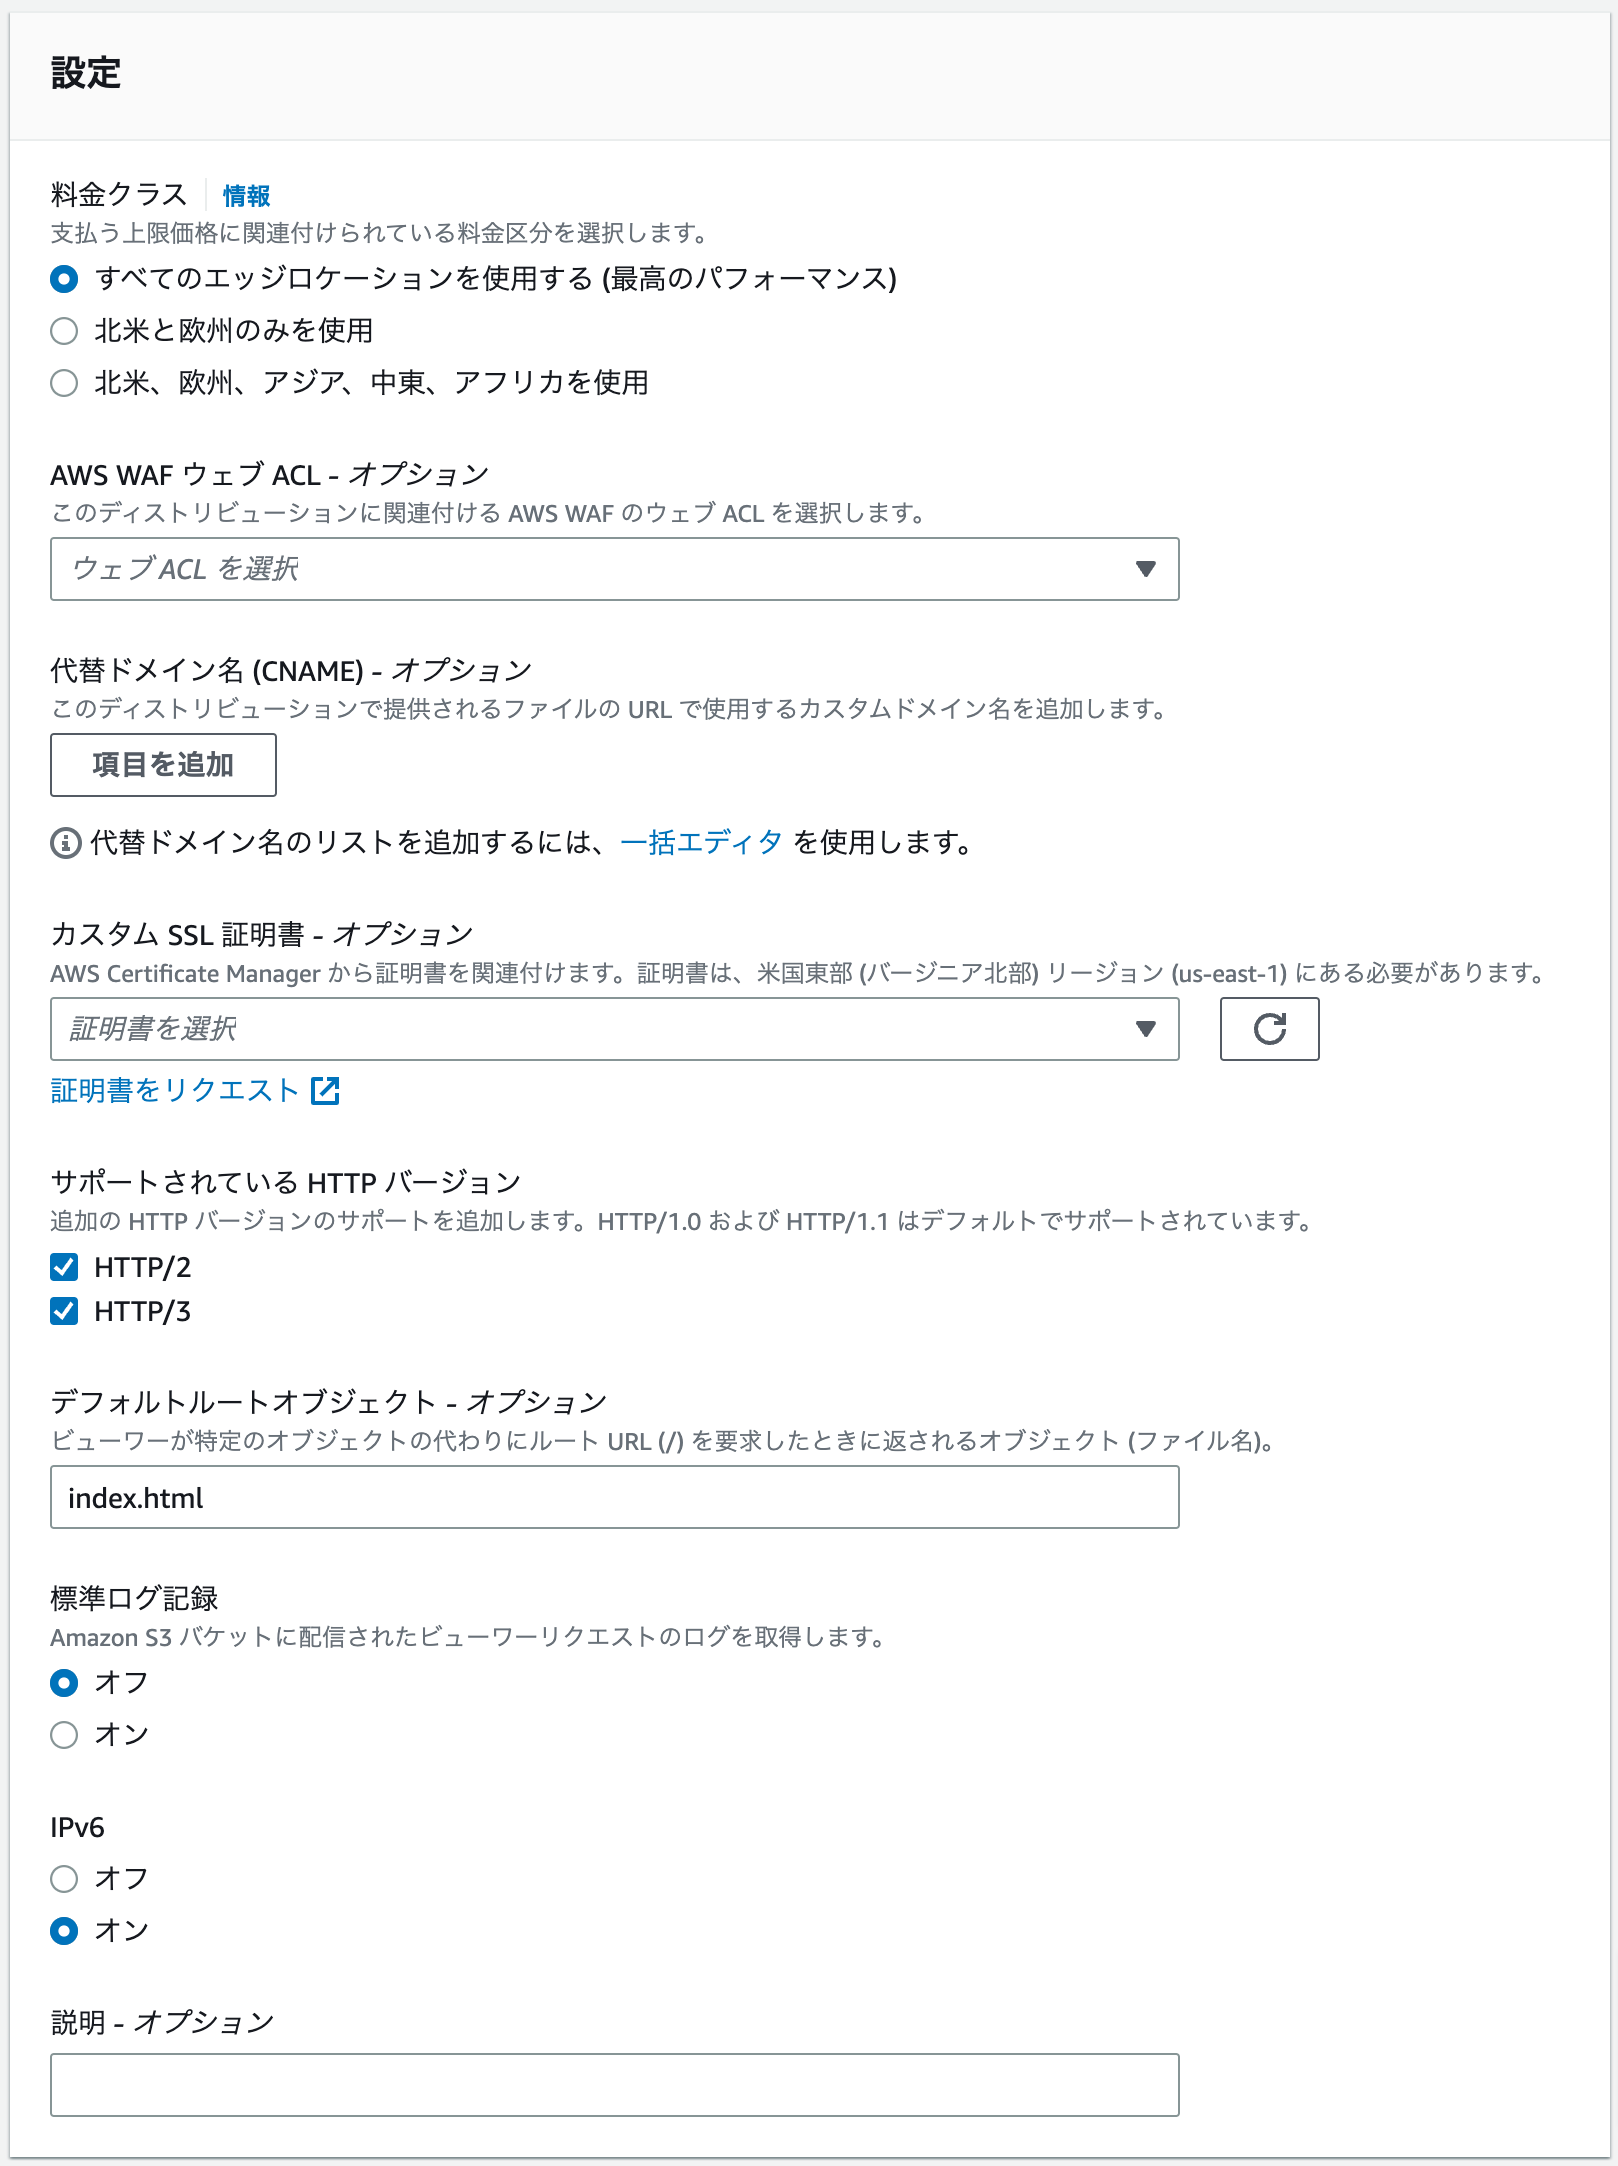 "AWS CloudFrontコンソール > 設定"